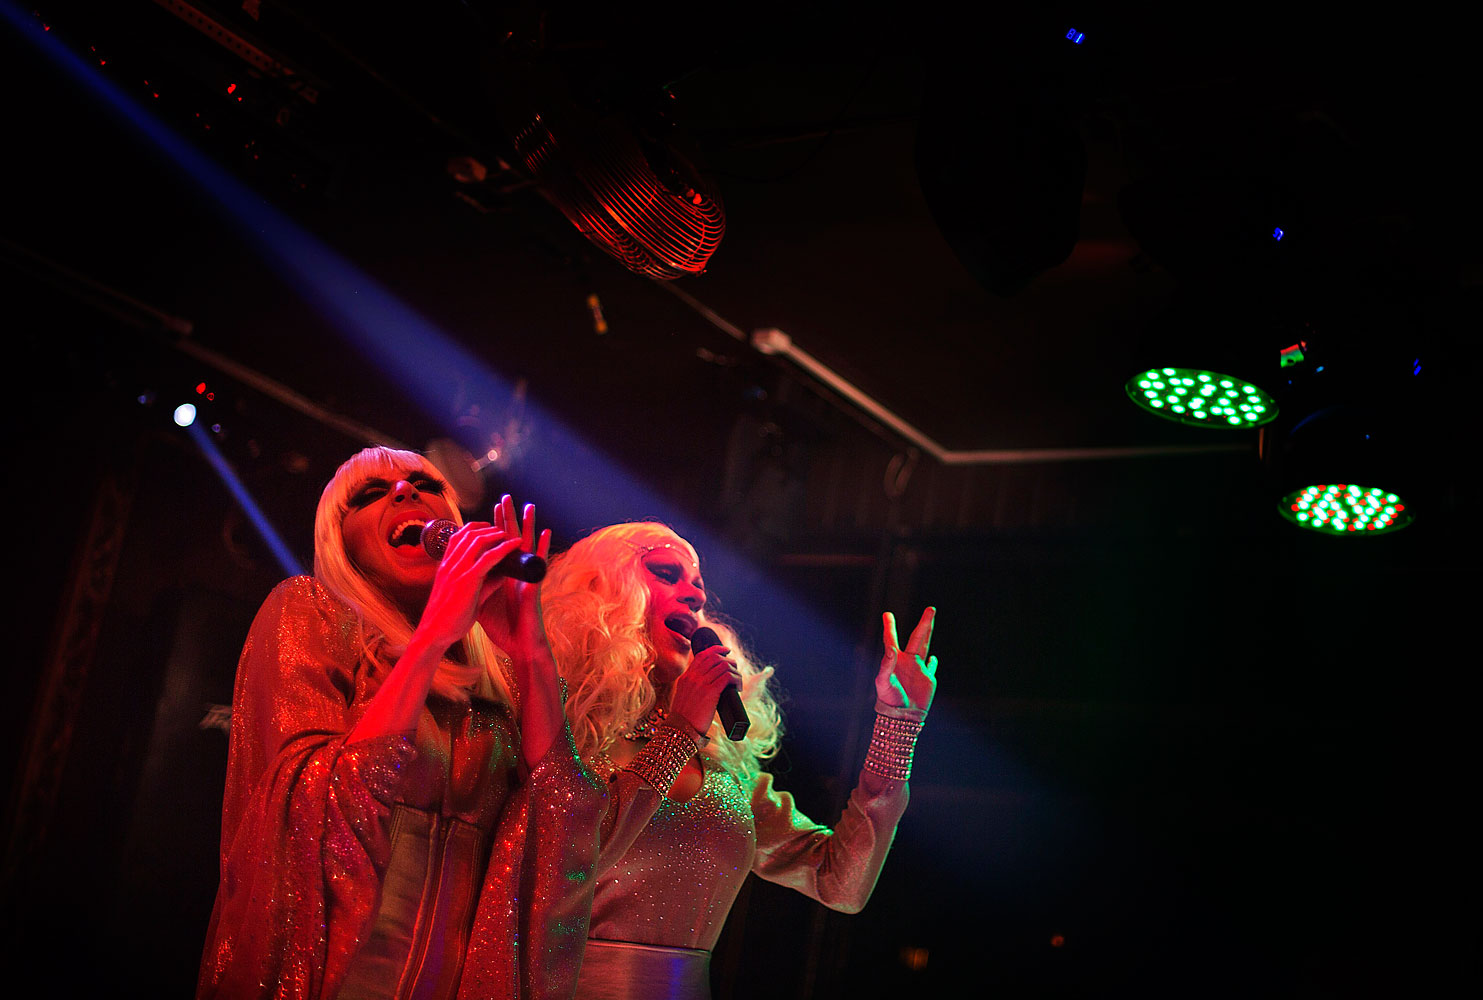 Kira, left, and Lisa, right, who would only give their stage names, perform during a show at the Mayak cabaret in Sochi, Feb. 8, 2014.